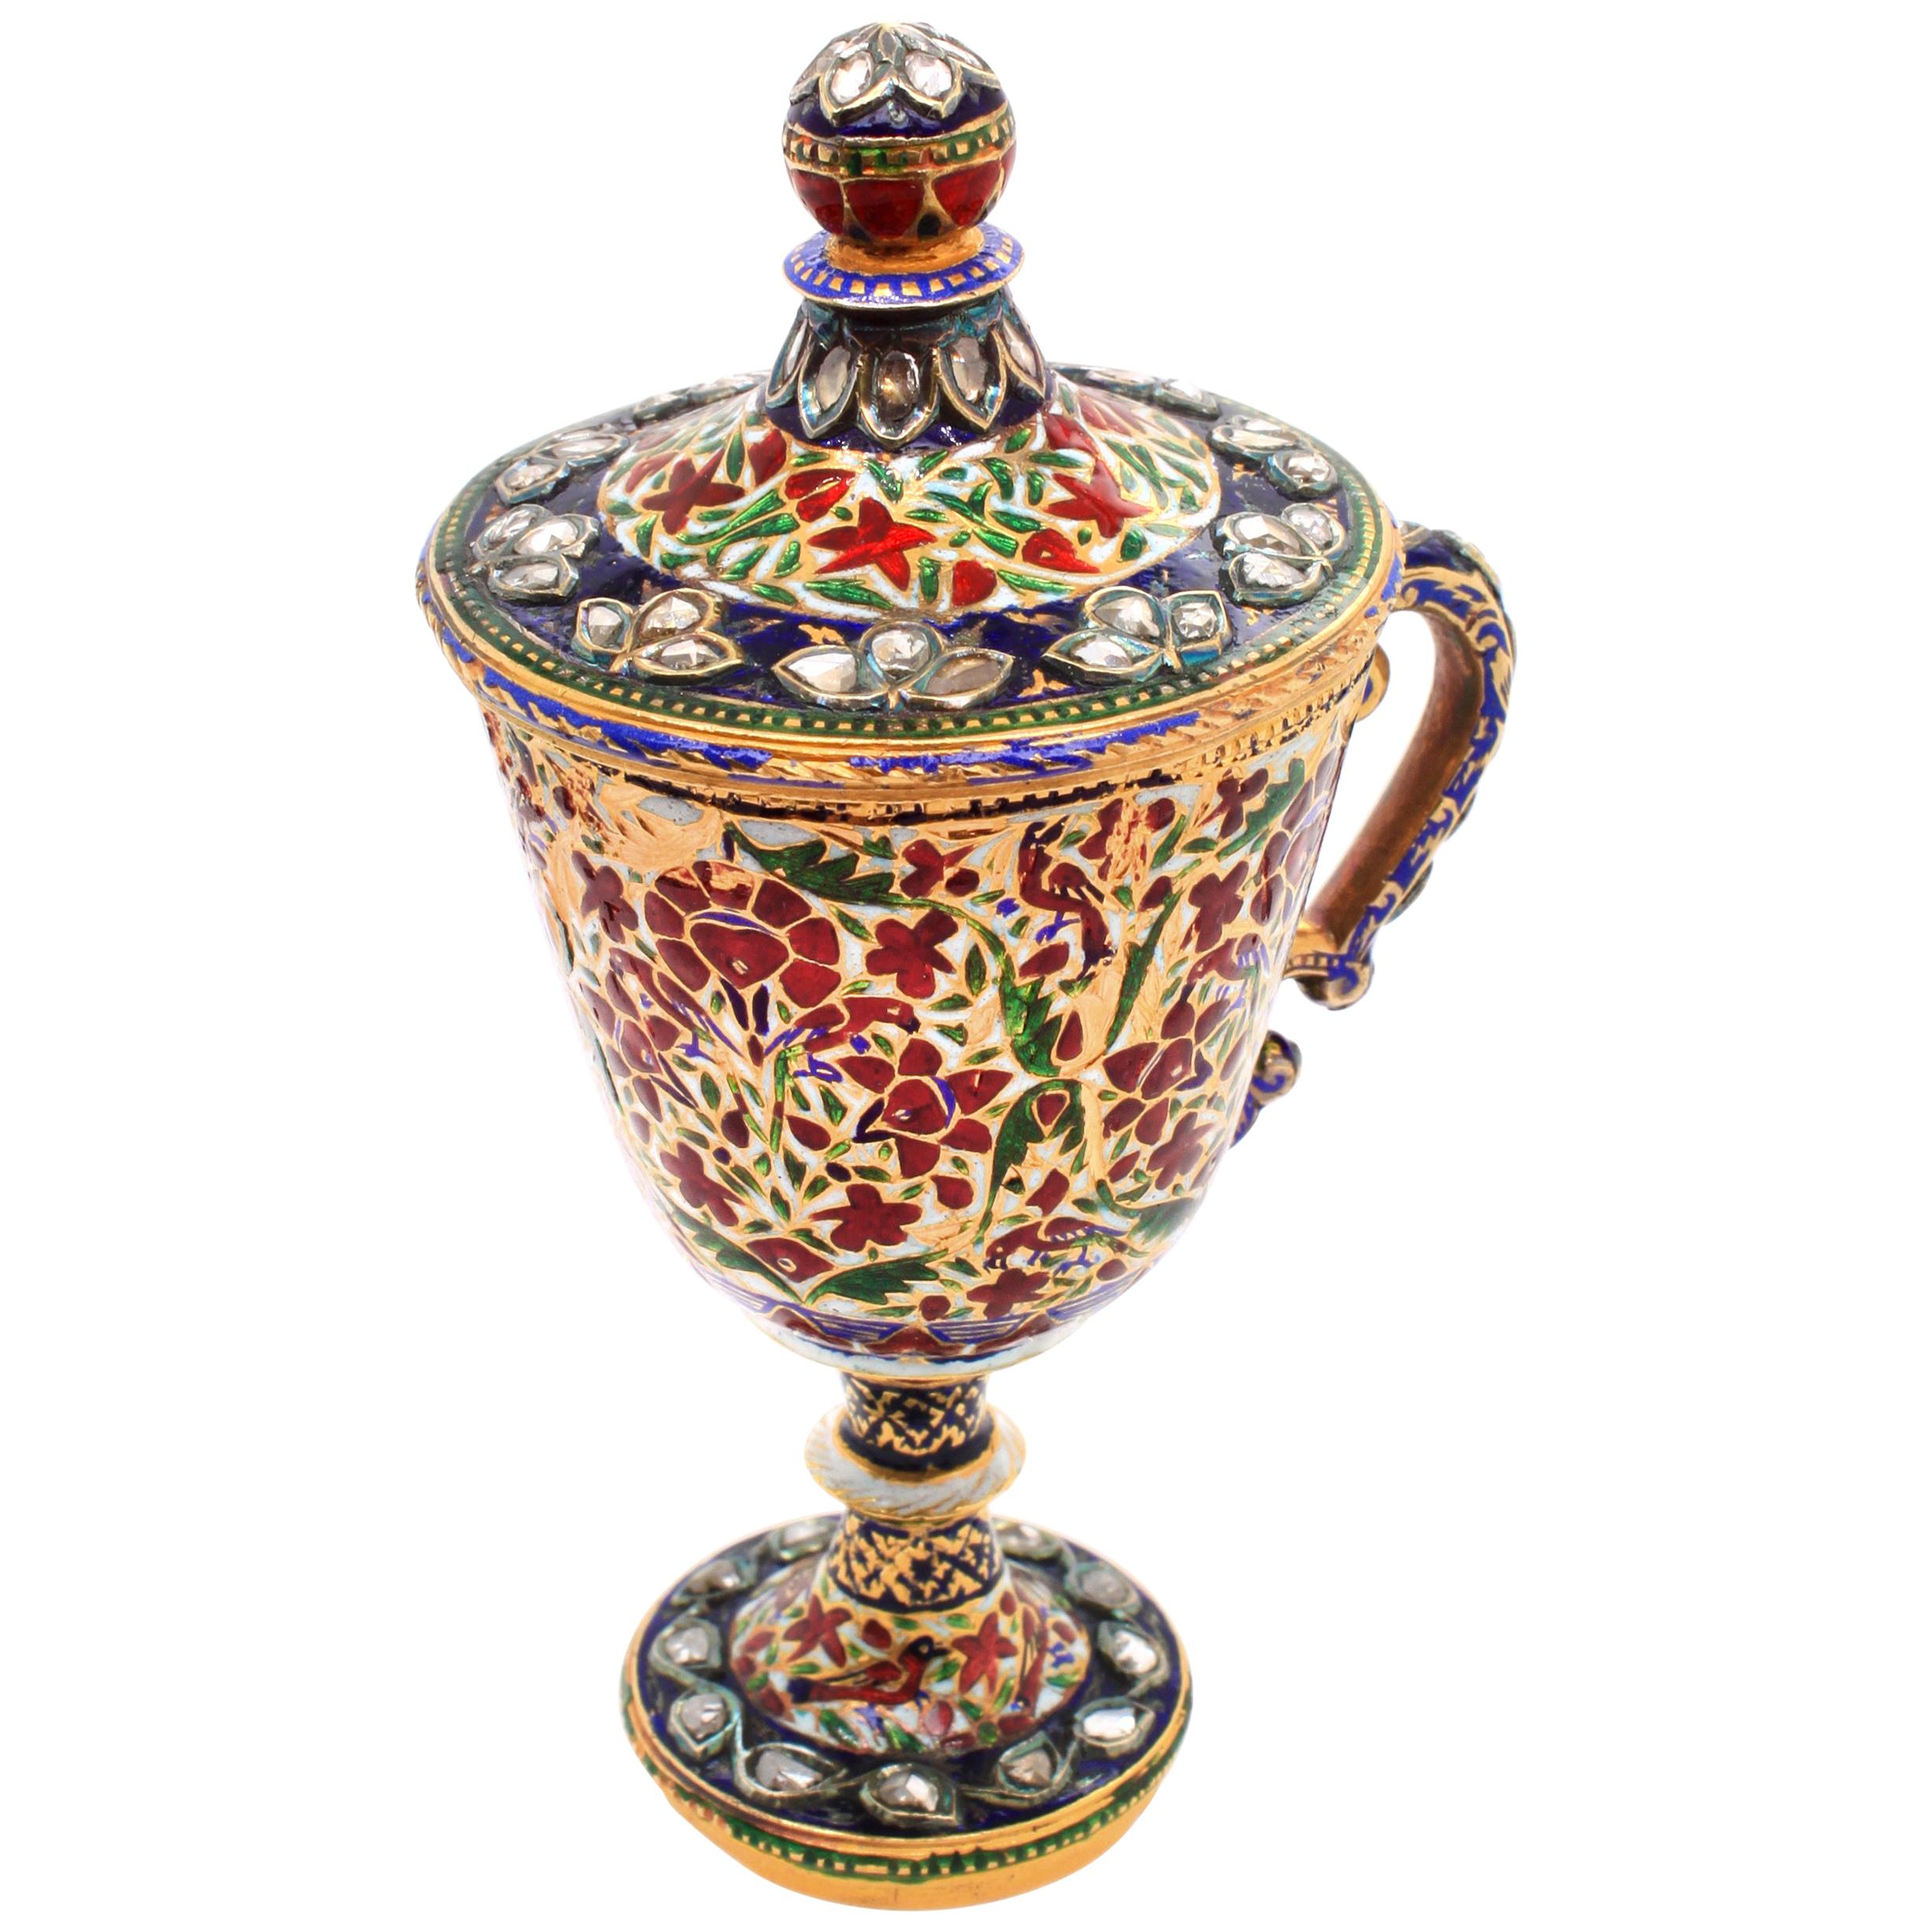 Rare Mughal Enamel and Diamond Cup, Early 19th Century